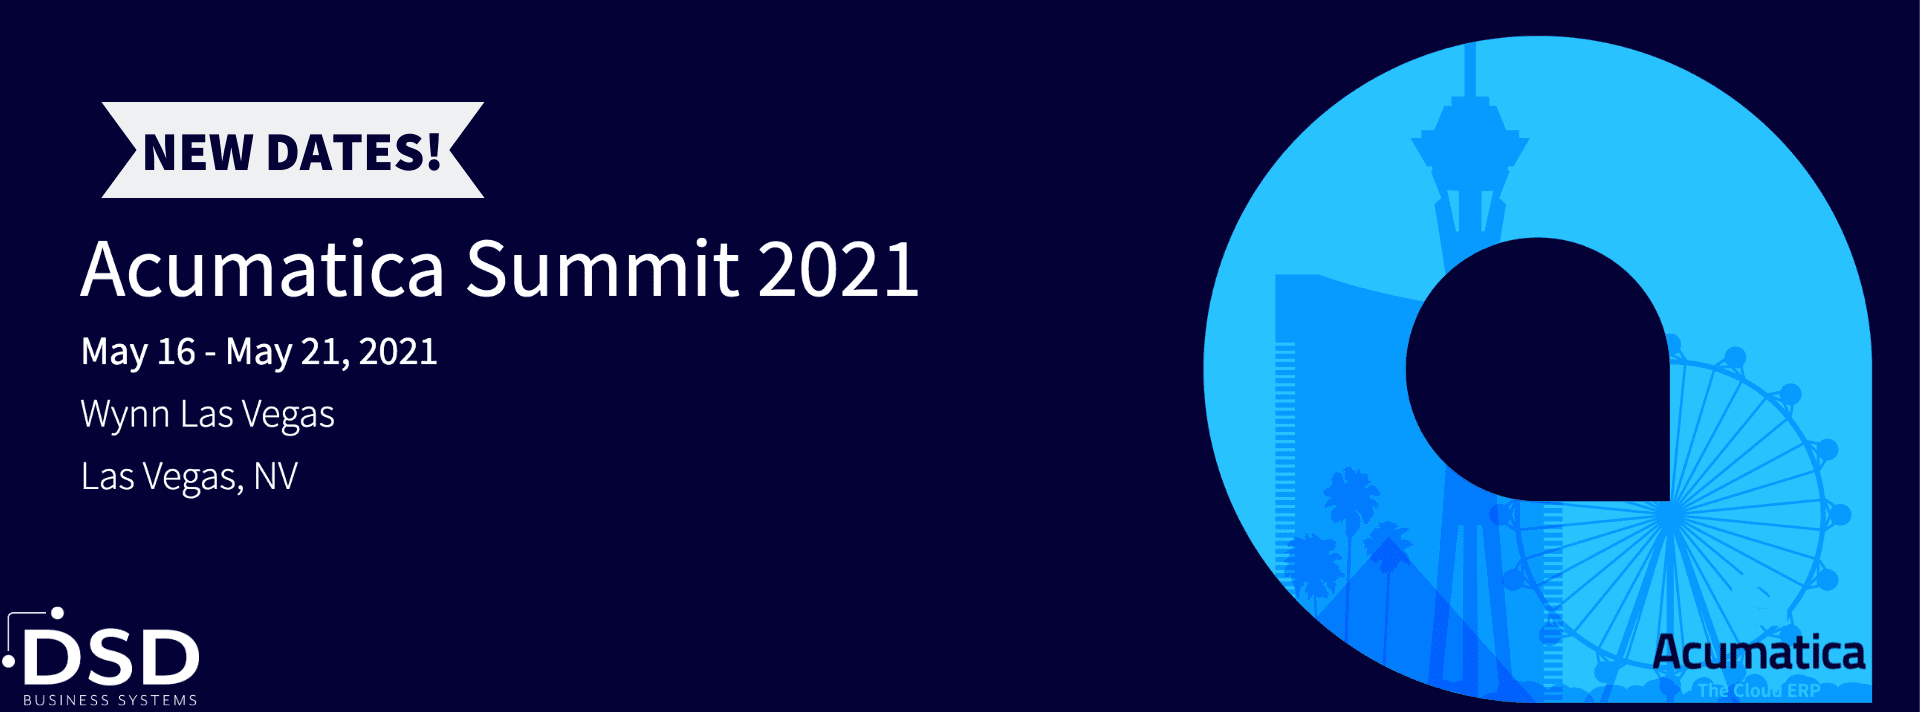 ACUMATICA SUMMIT 2021 - DSD Business Systems